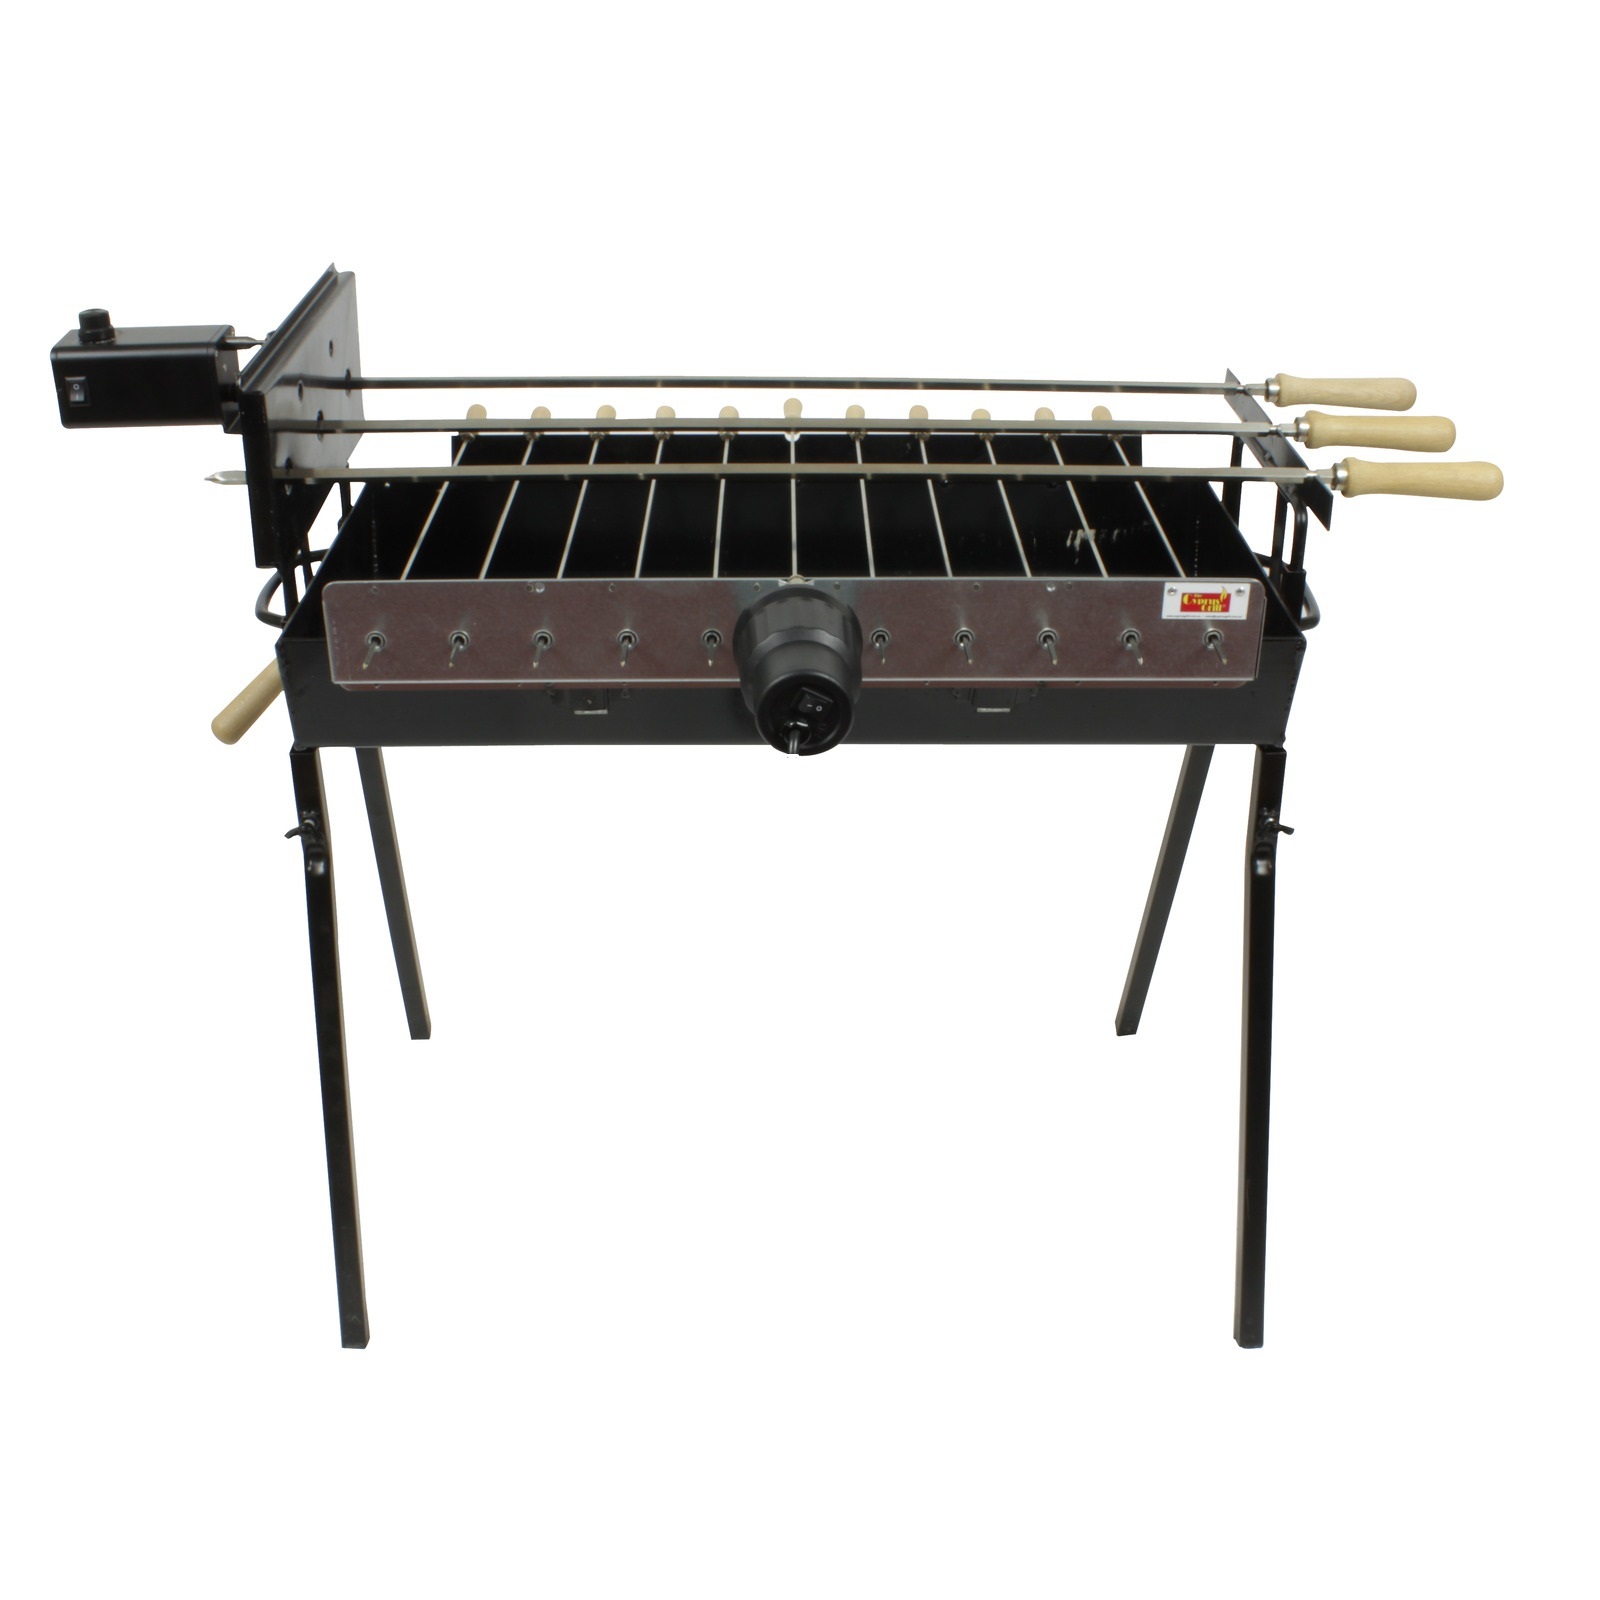 Cyprus Grill Modern Rotisserie Spit - Souvla Package Deal with 20kg Variable Speed Motor - CG-0779B